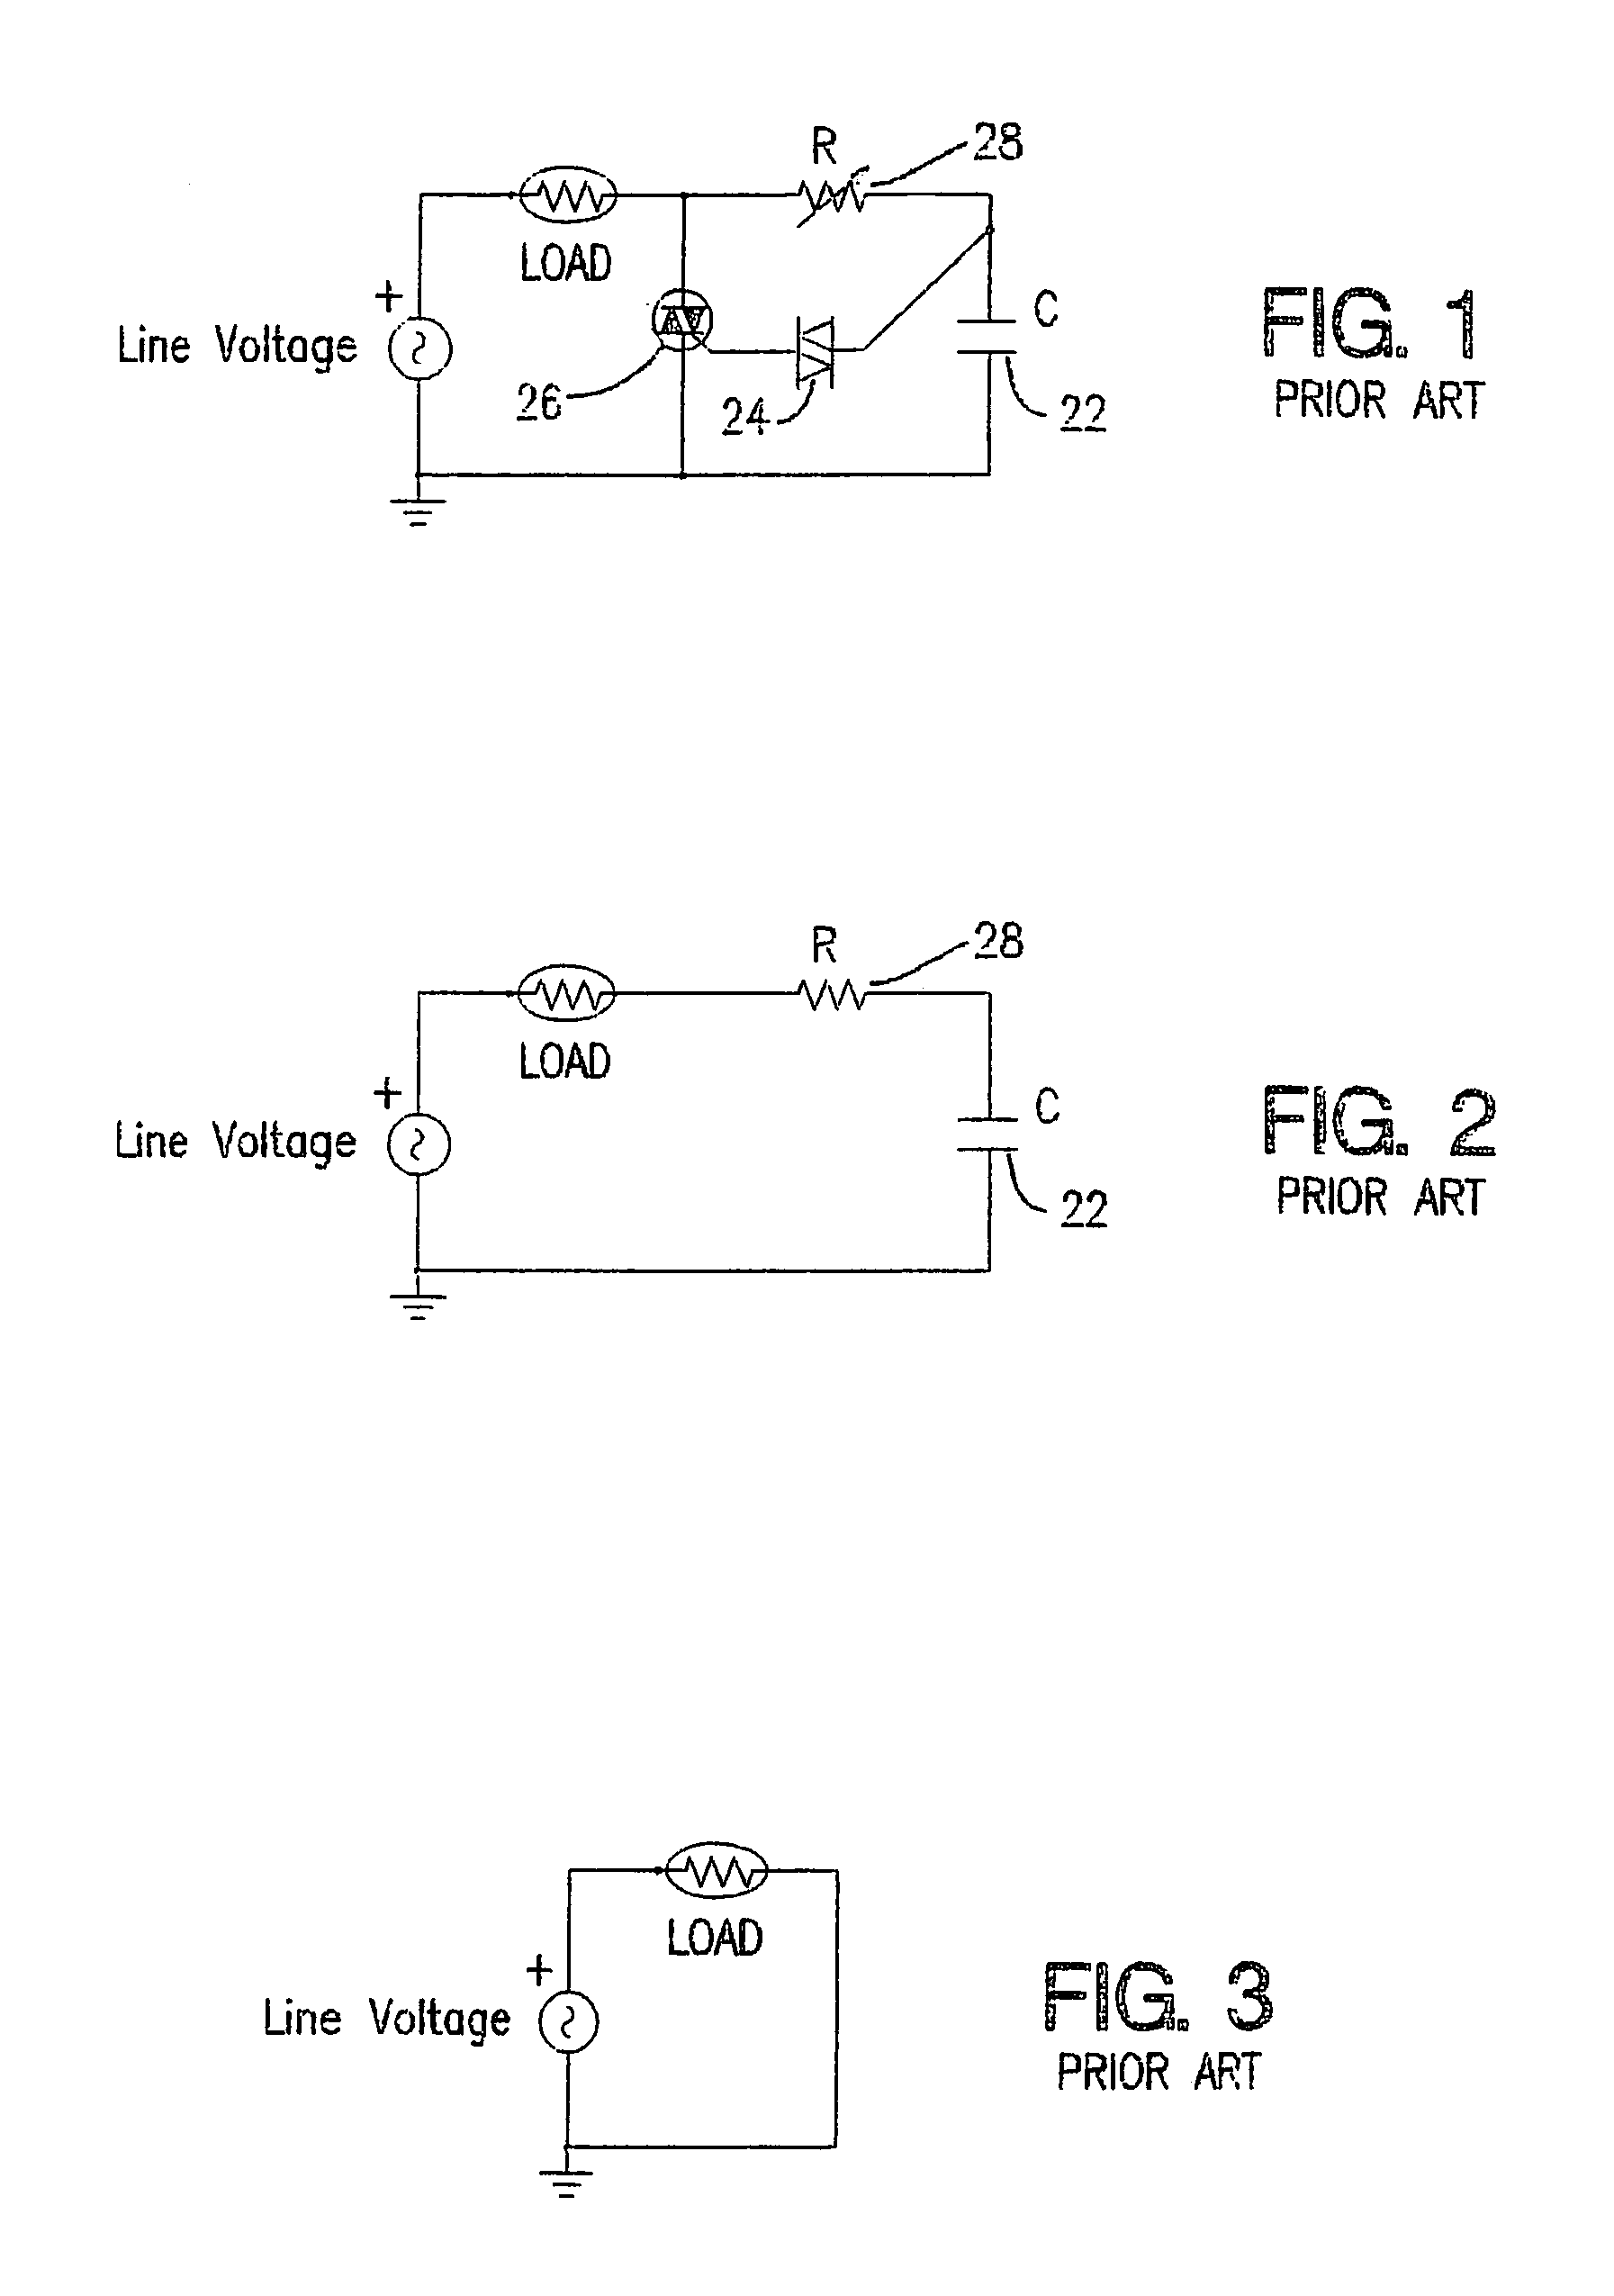 Method of soft-starting a switching power supply containing phase-control clipping circuit